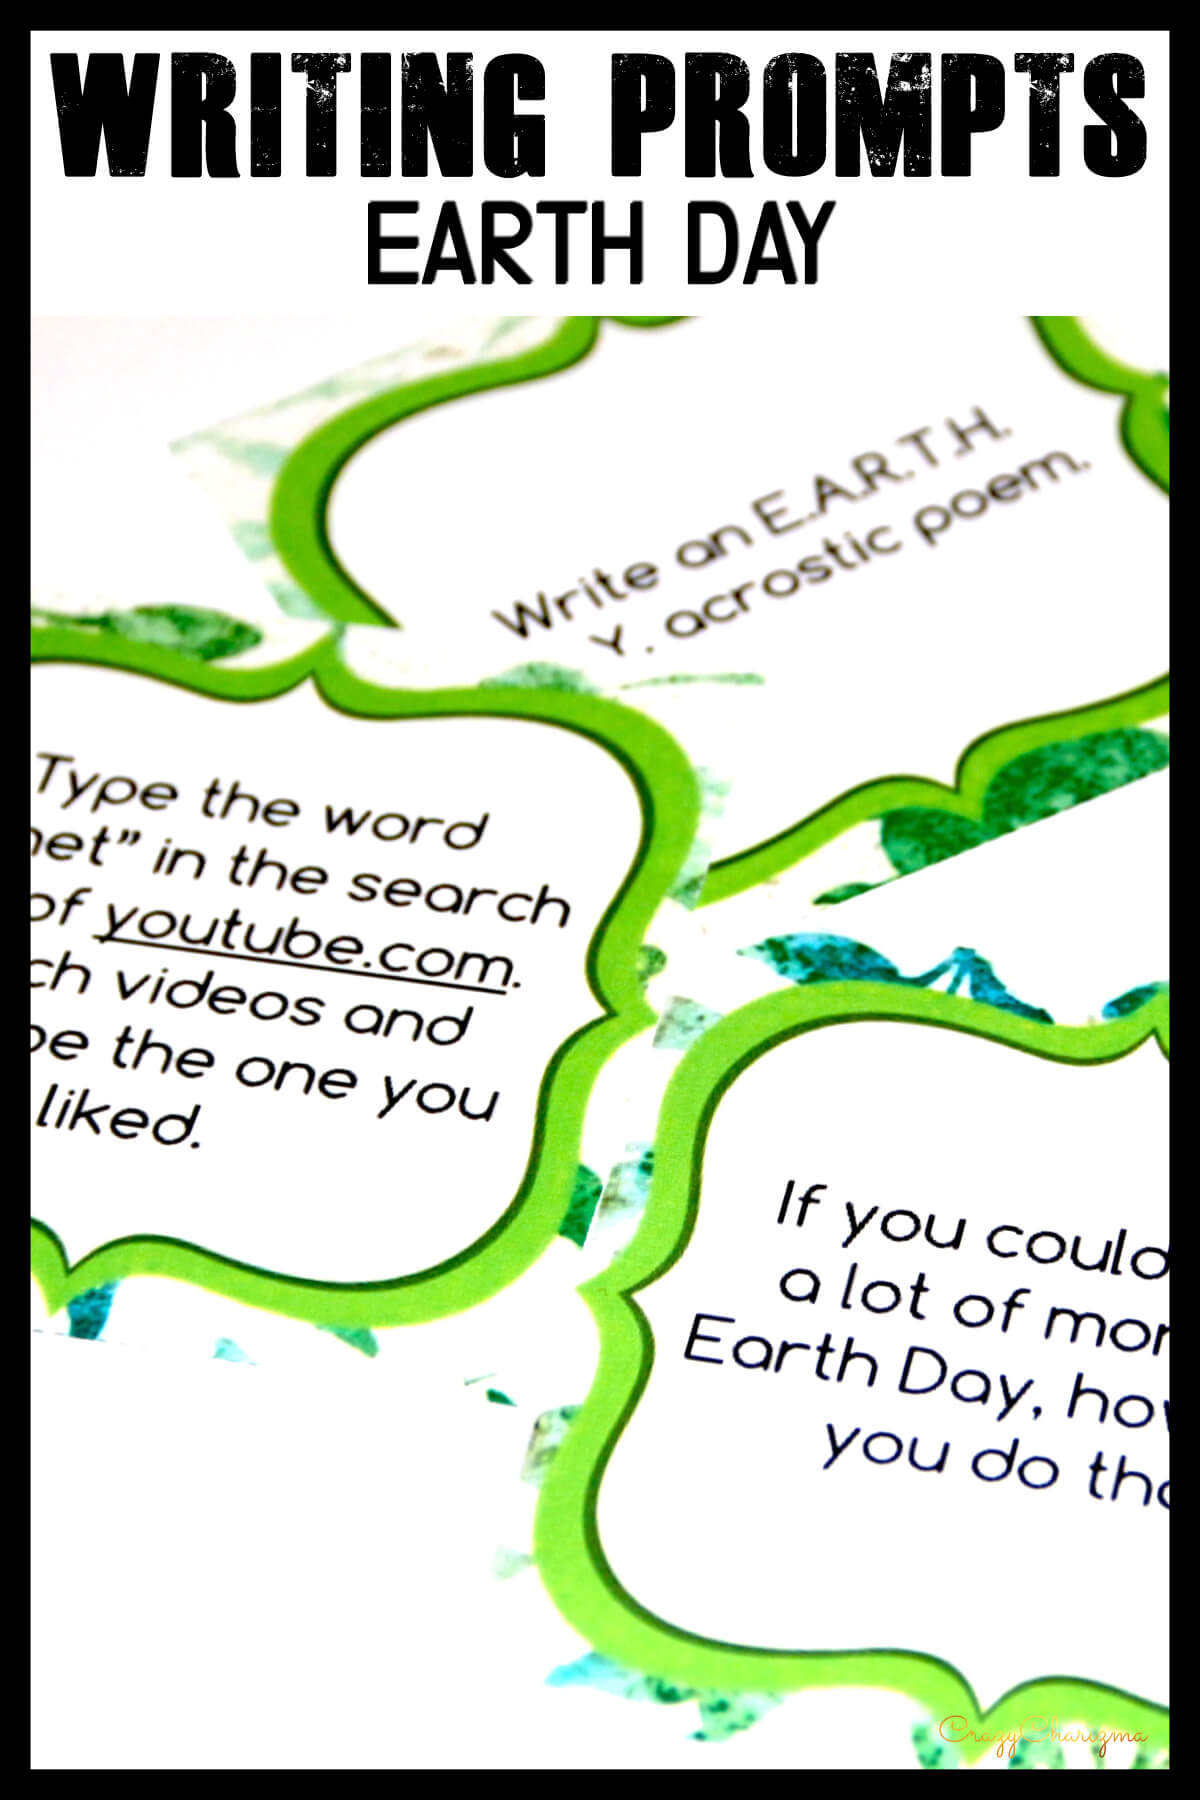 Celebrate Earth Day in your classroom and provide students with writing tasks and ideas. The packet contains narrative, informational and opinion writing prompts for teens. The prompts can be used as Writing Centers, as well as with adults during ESL lessons.